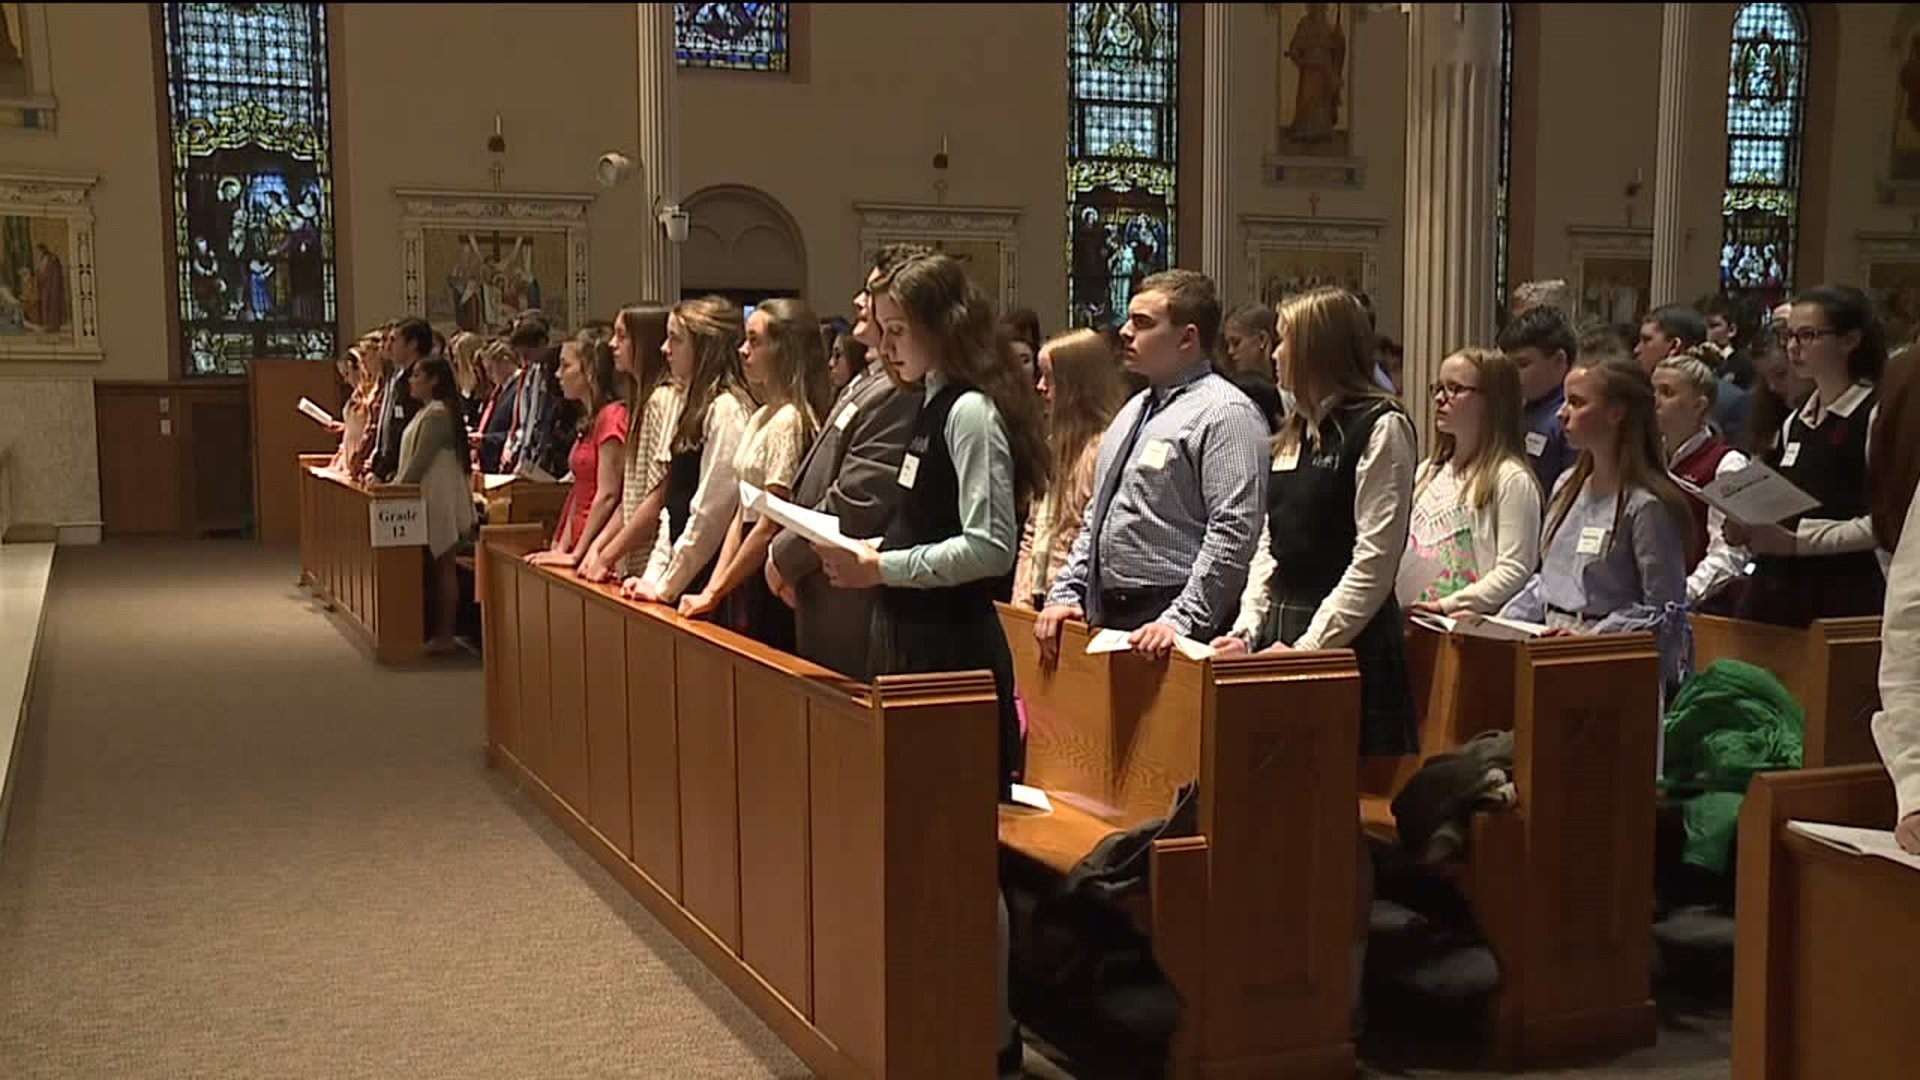 Bishop's Youth Award Presented to Students in Scranton